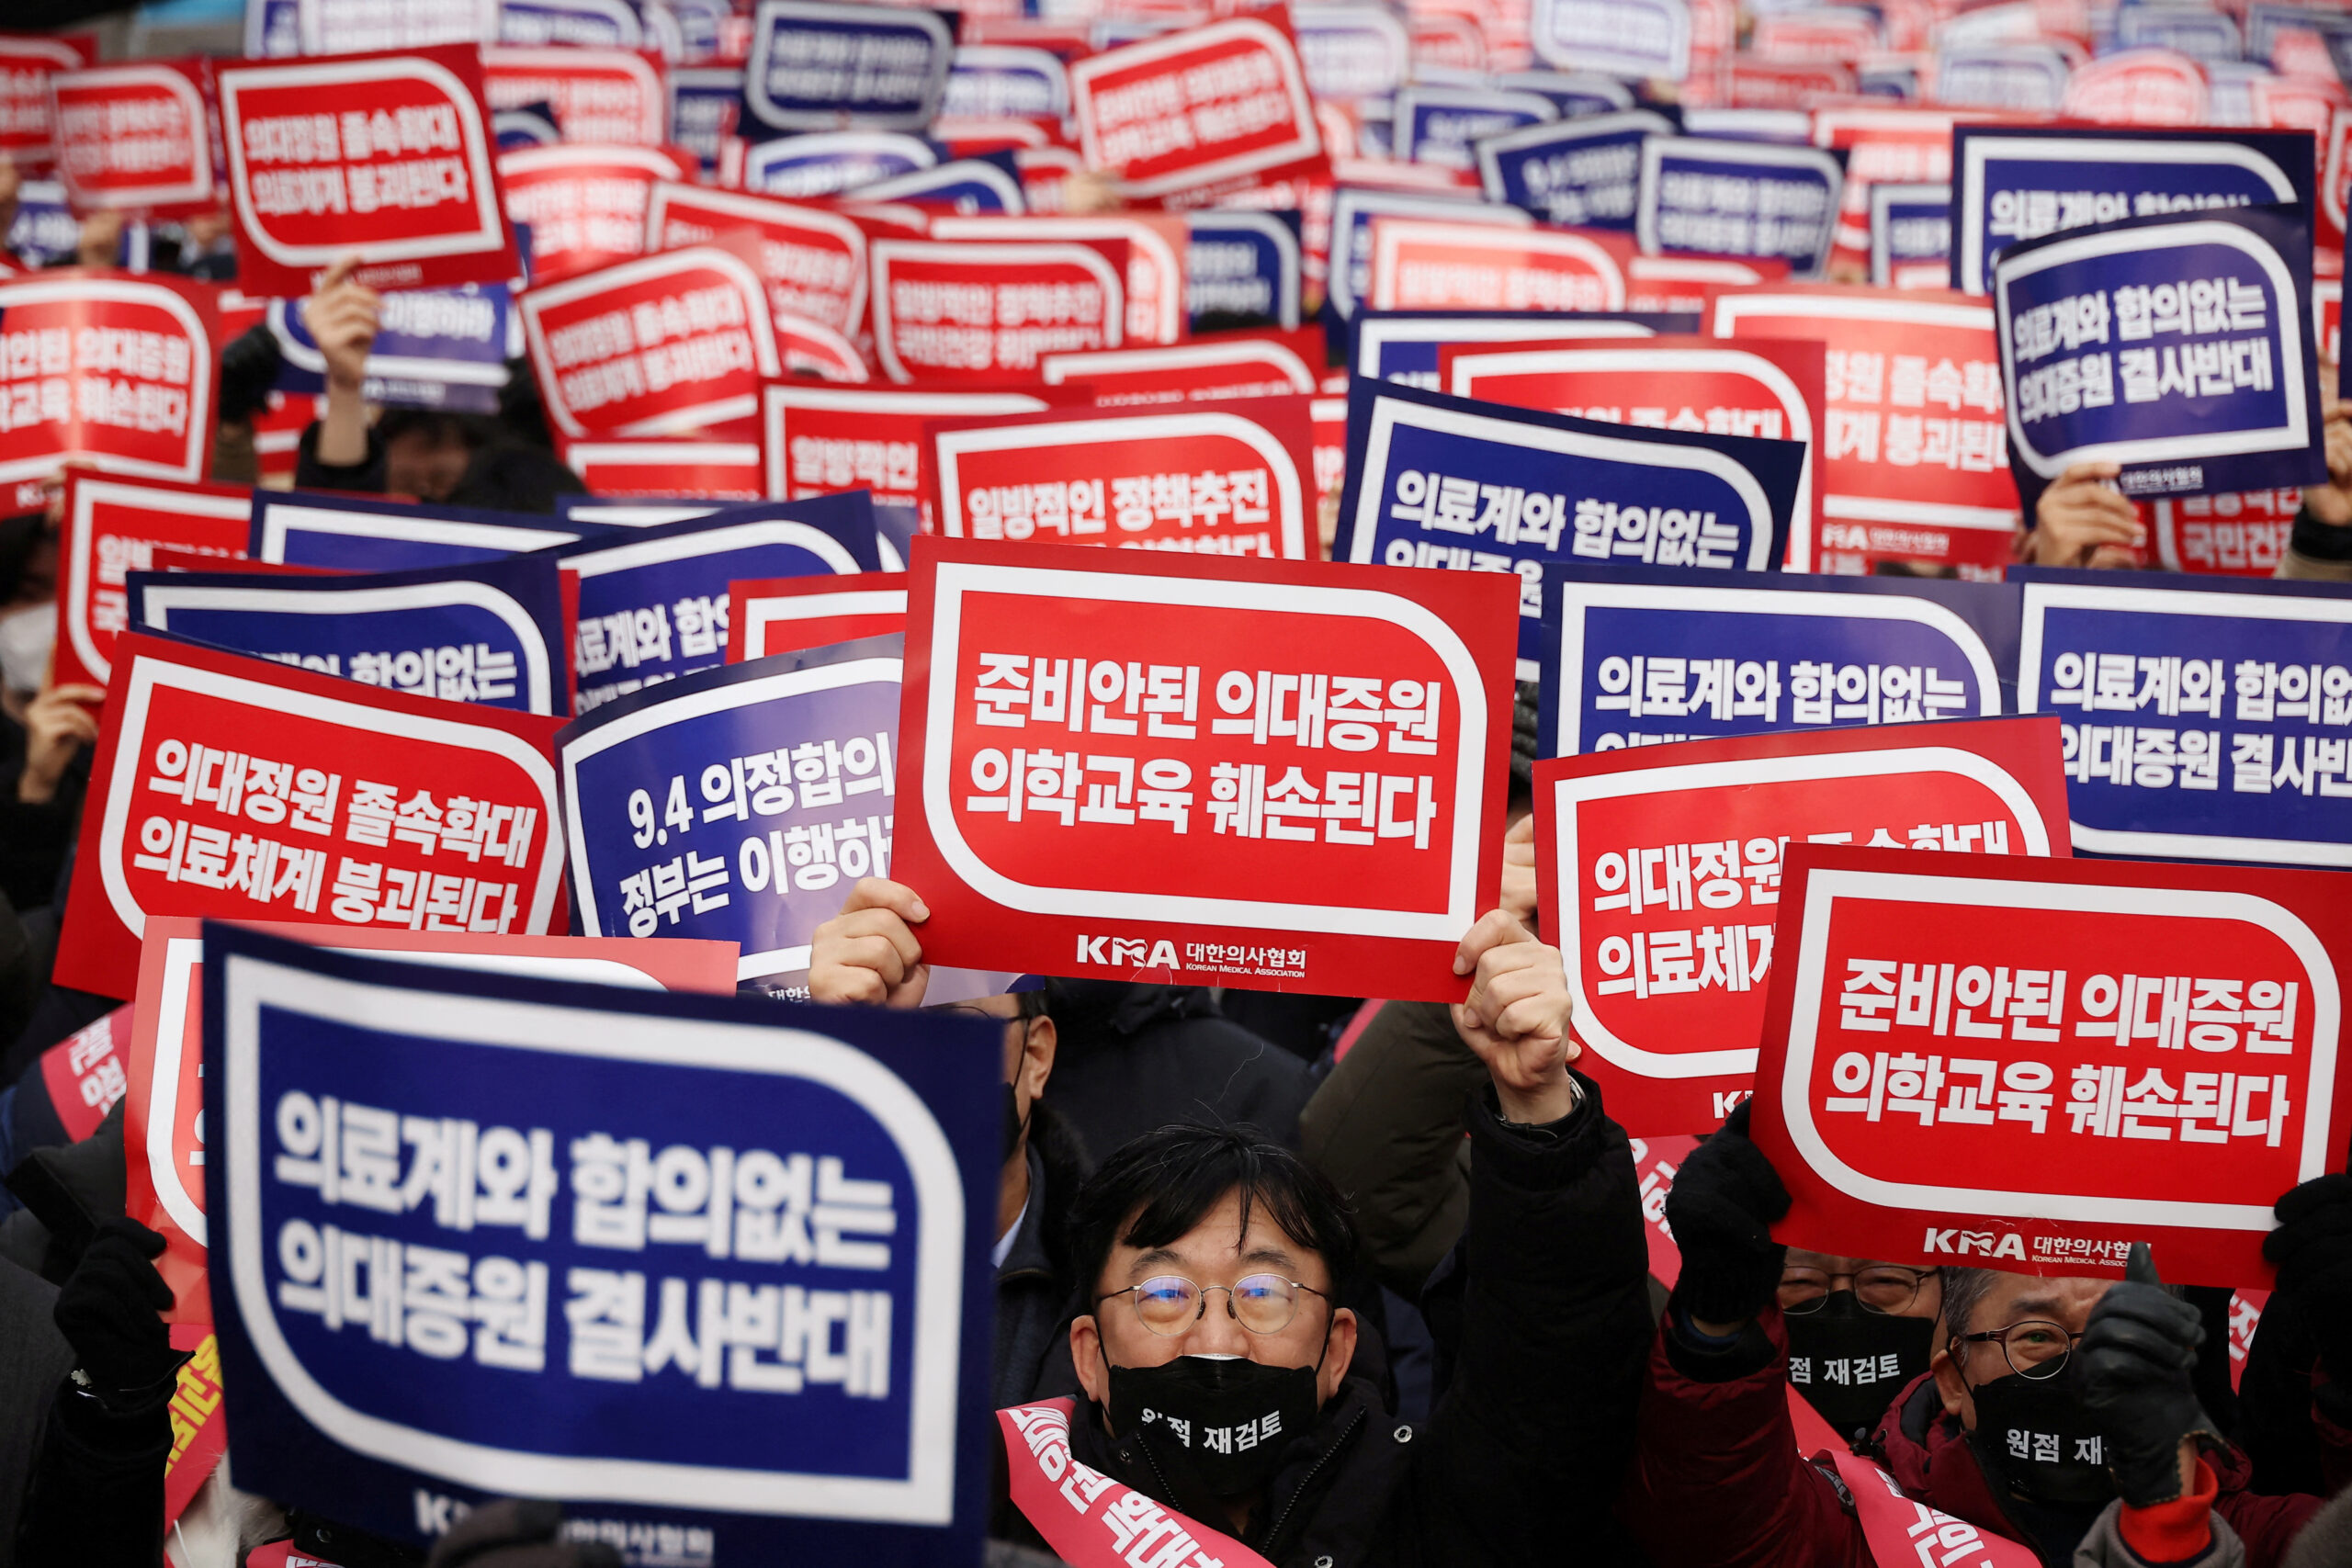 S. Korea's medical professors join protests, reduce hours in practice